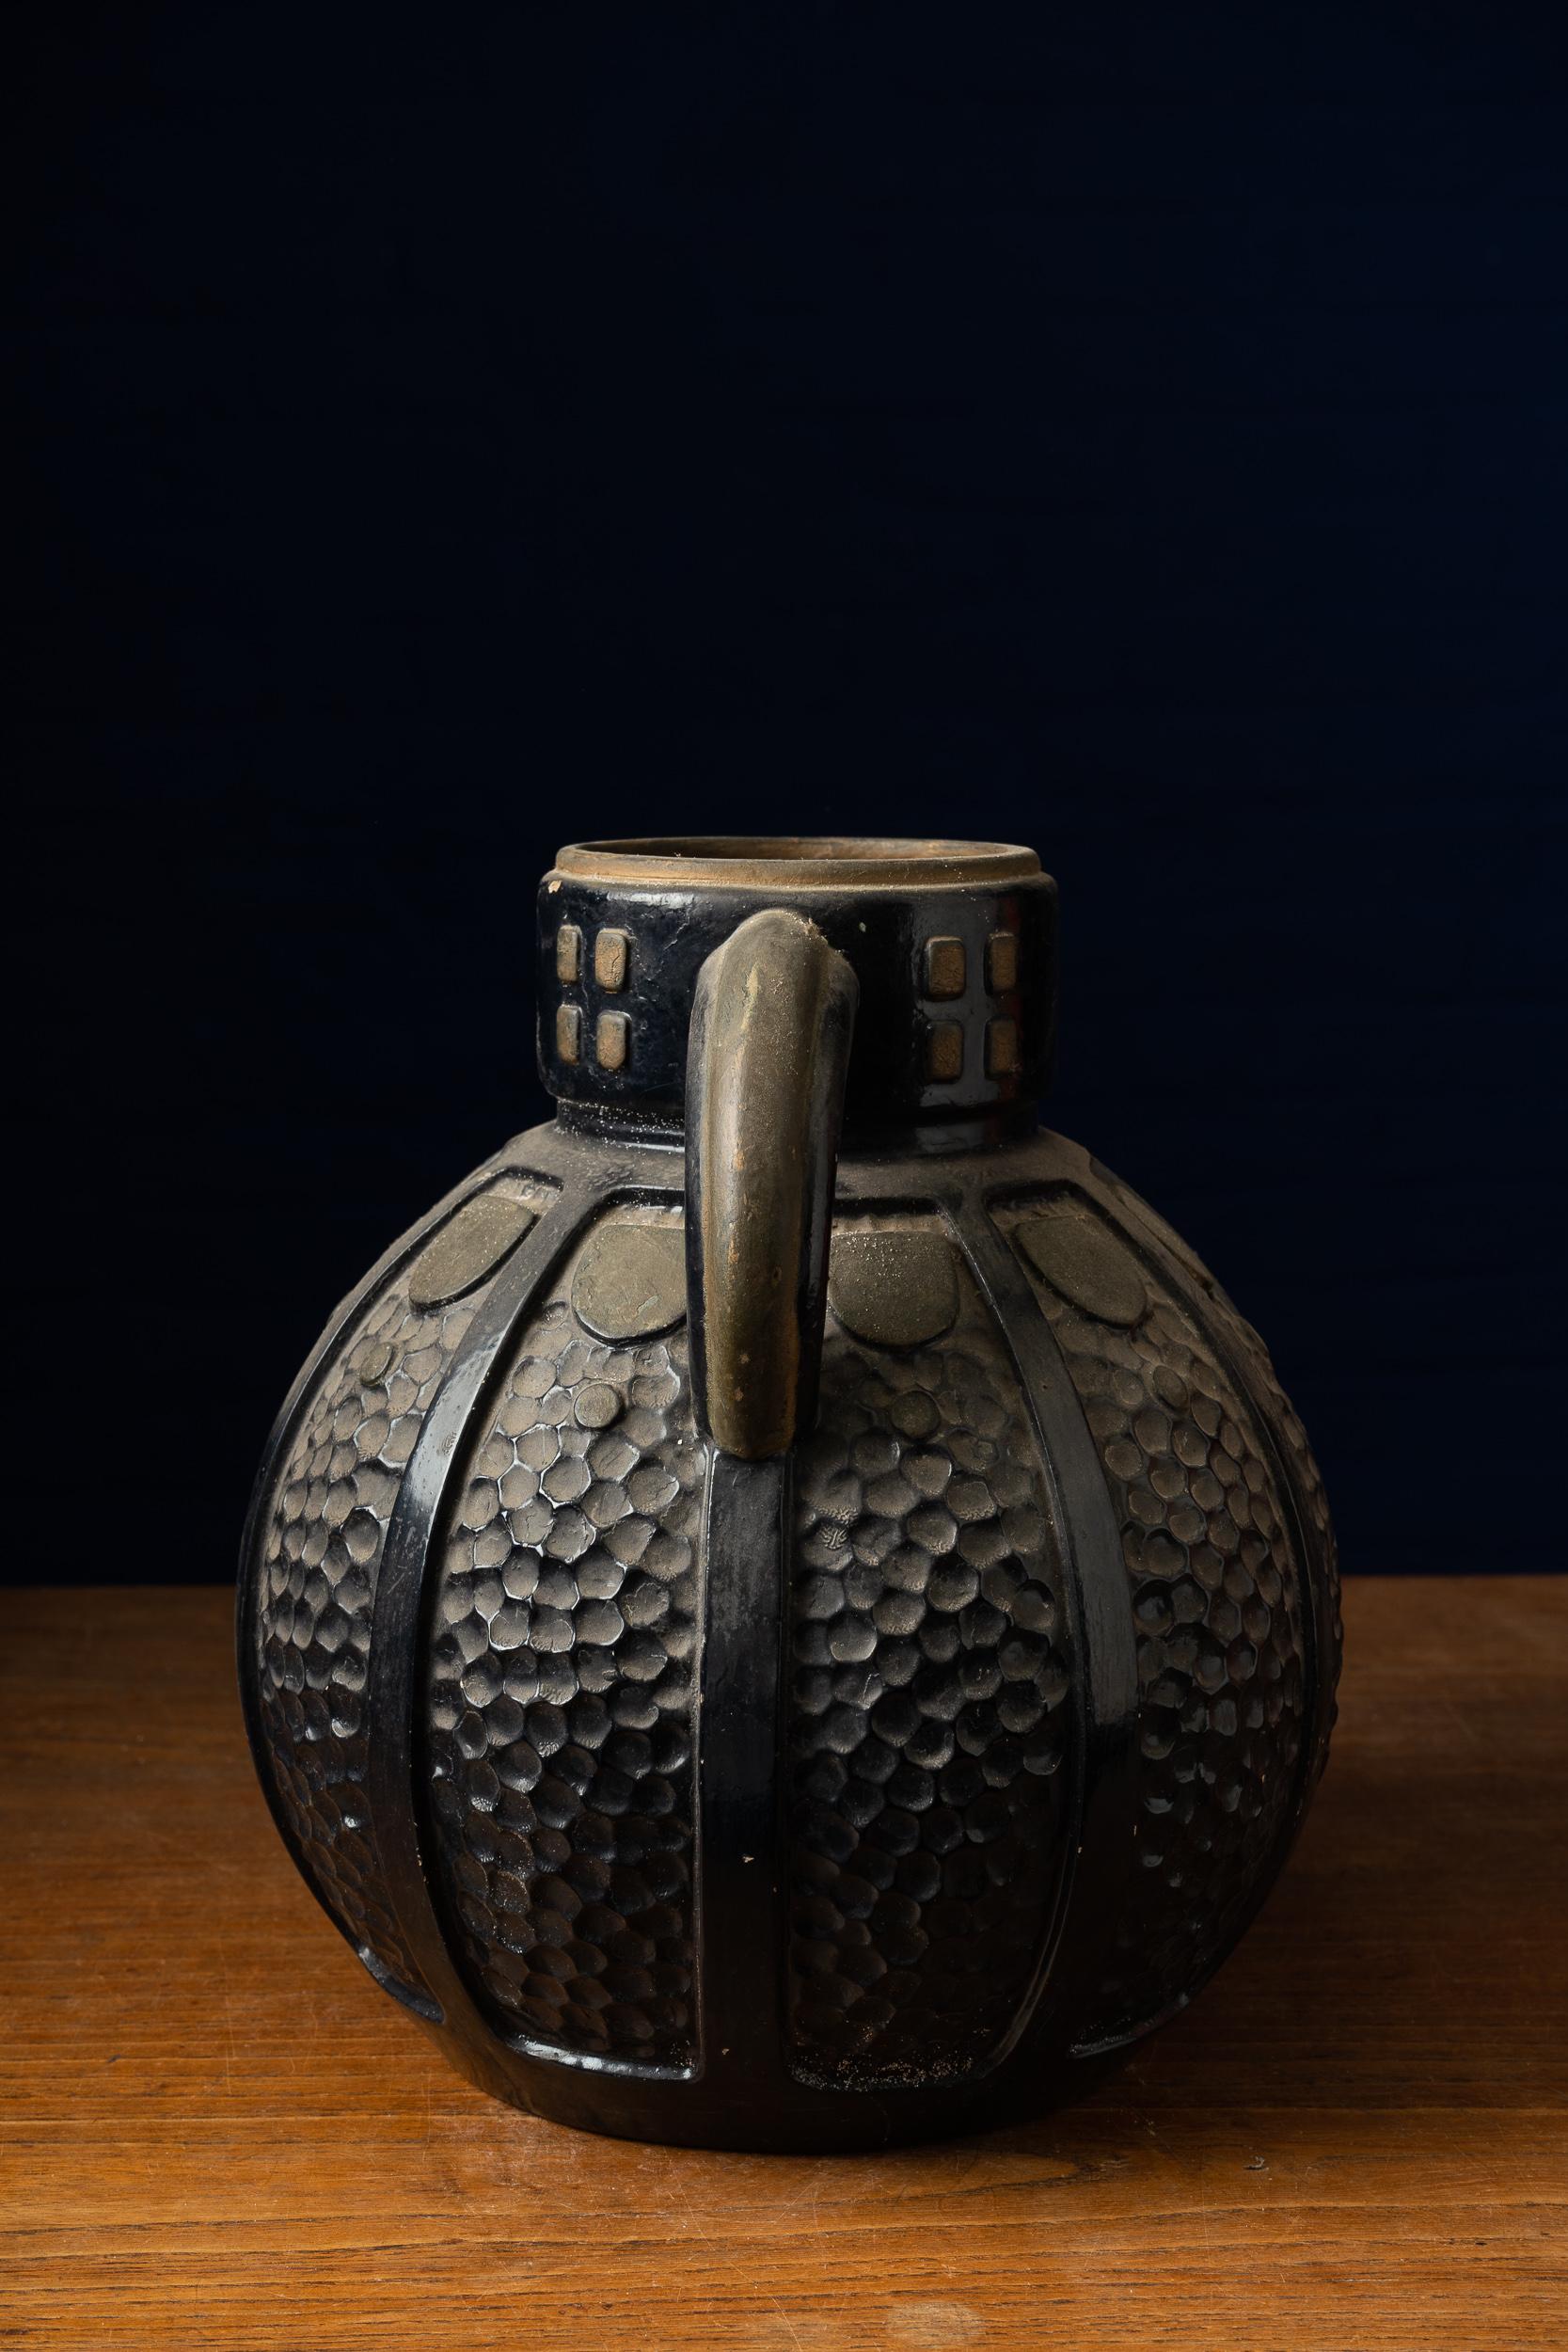 Decorative ceramics vase with a slightly patined black glaze finish and small ochre details. The item has a beautiful alveolar embossing and simple geometric shapes, as well as two holders.